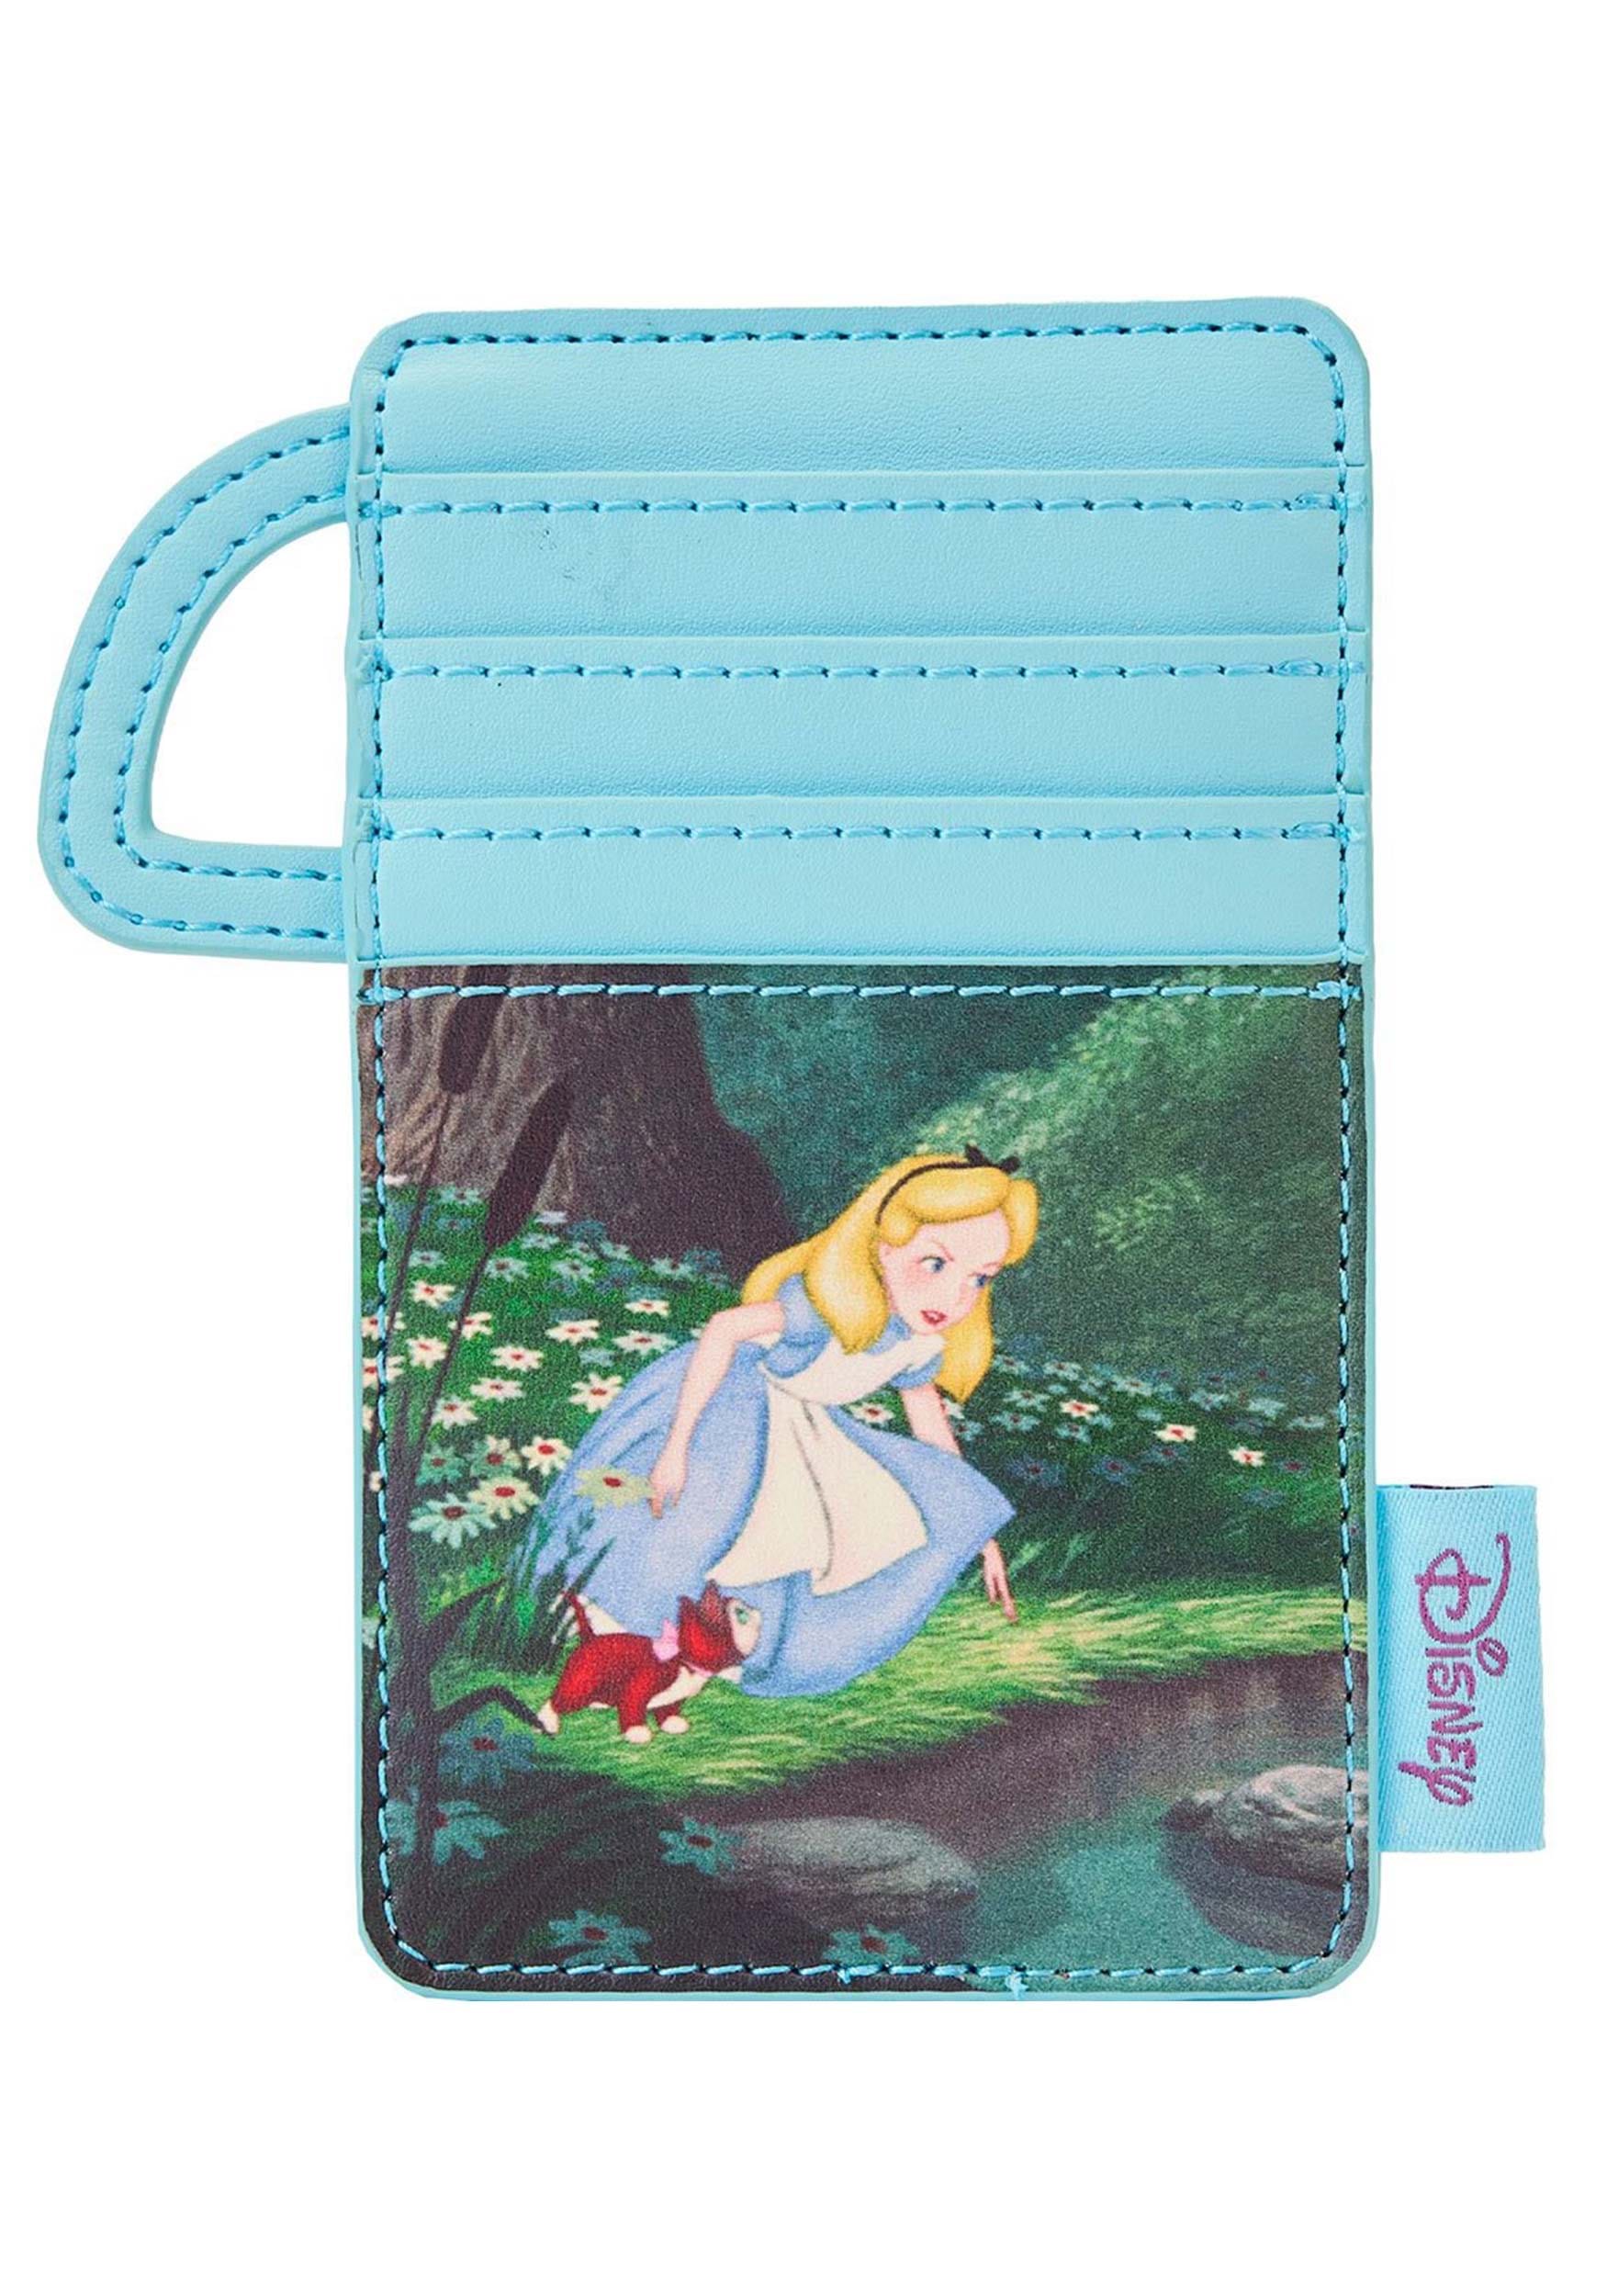 Disney Alice in Wonderland Classic Movie Cardholder by Loungefly